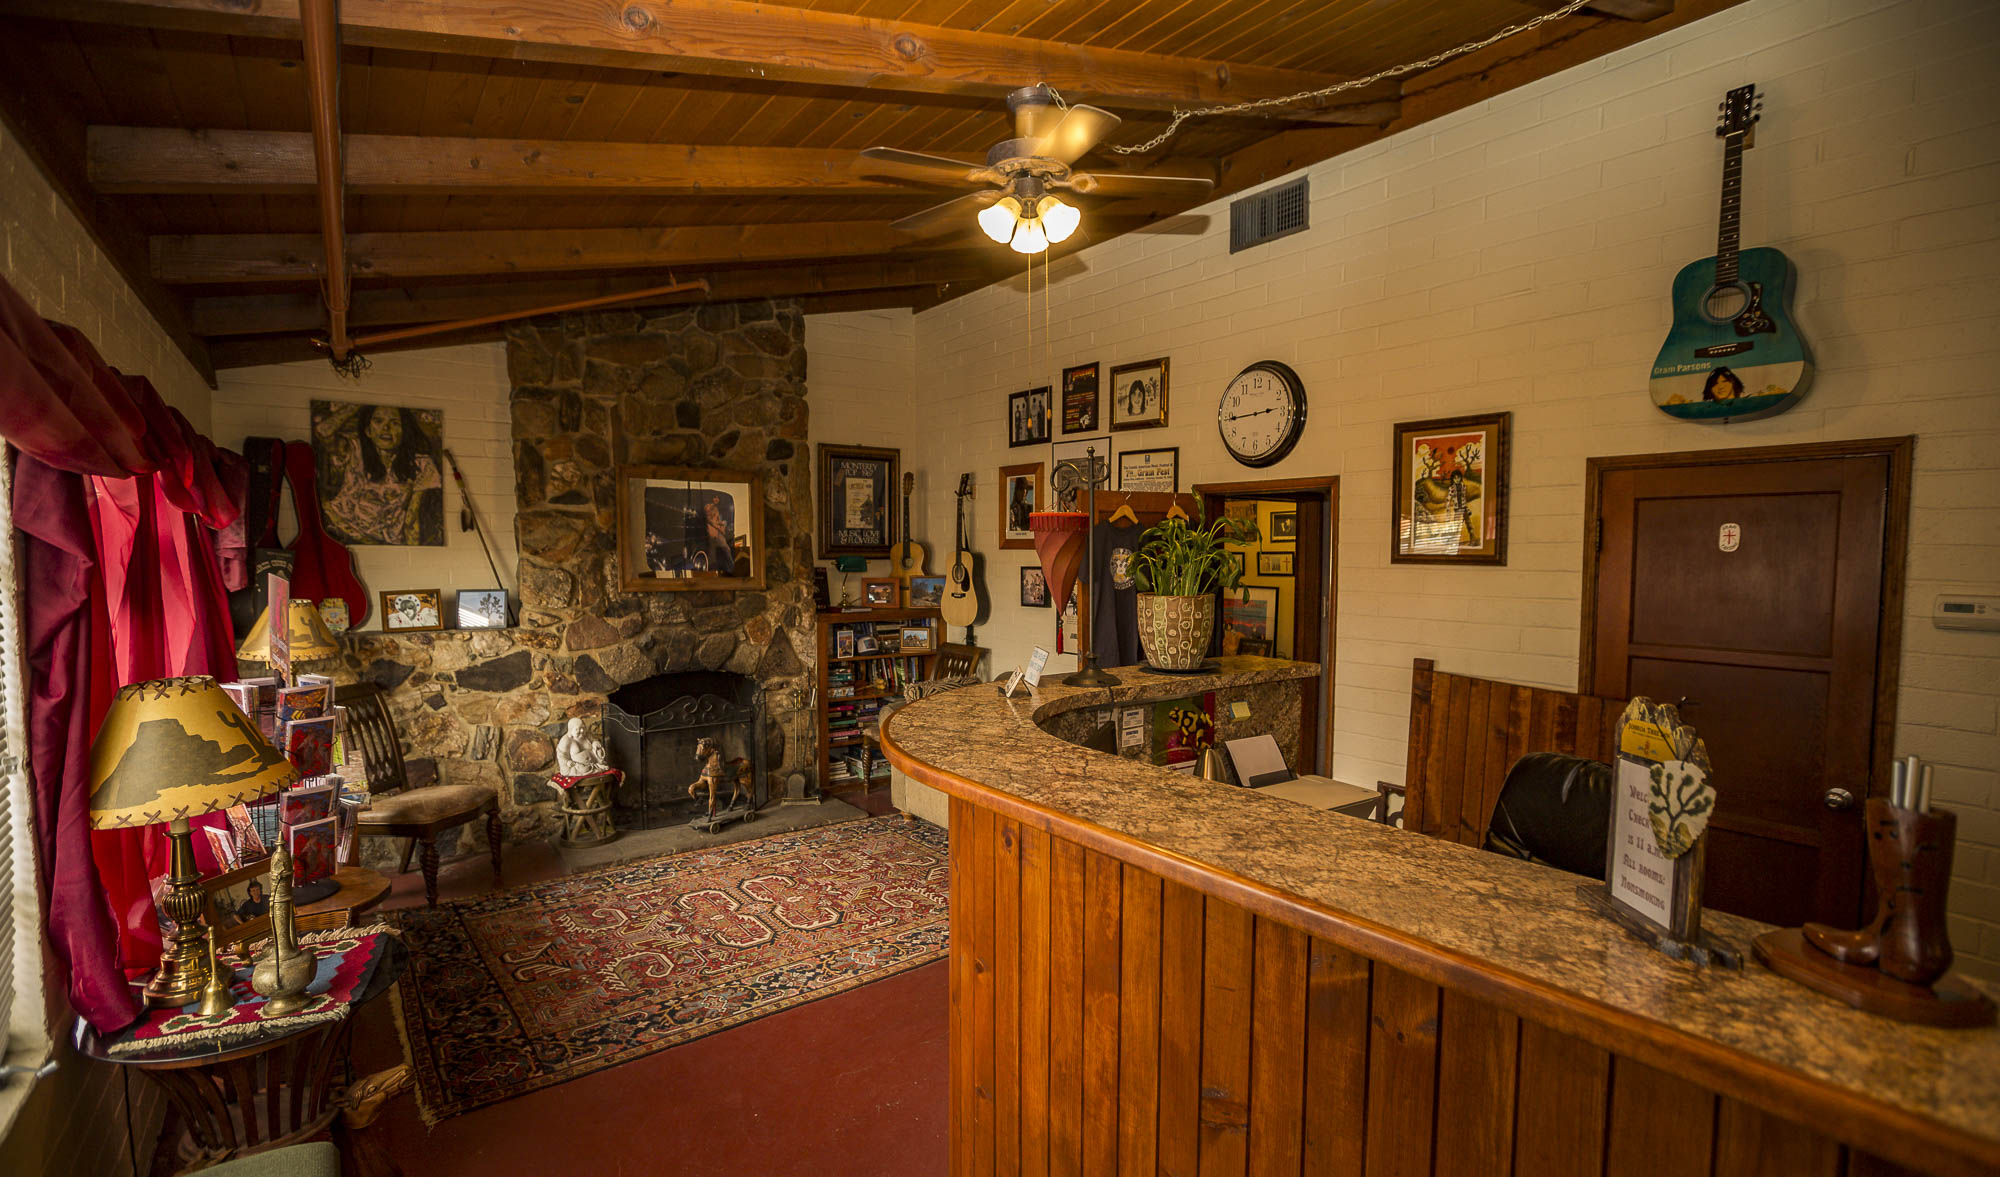 The main office, there is a tall wooden desk to the right and a seating area with a stone fire place to the left.